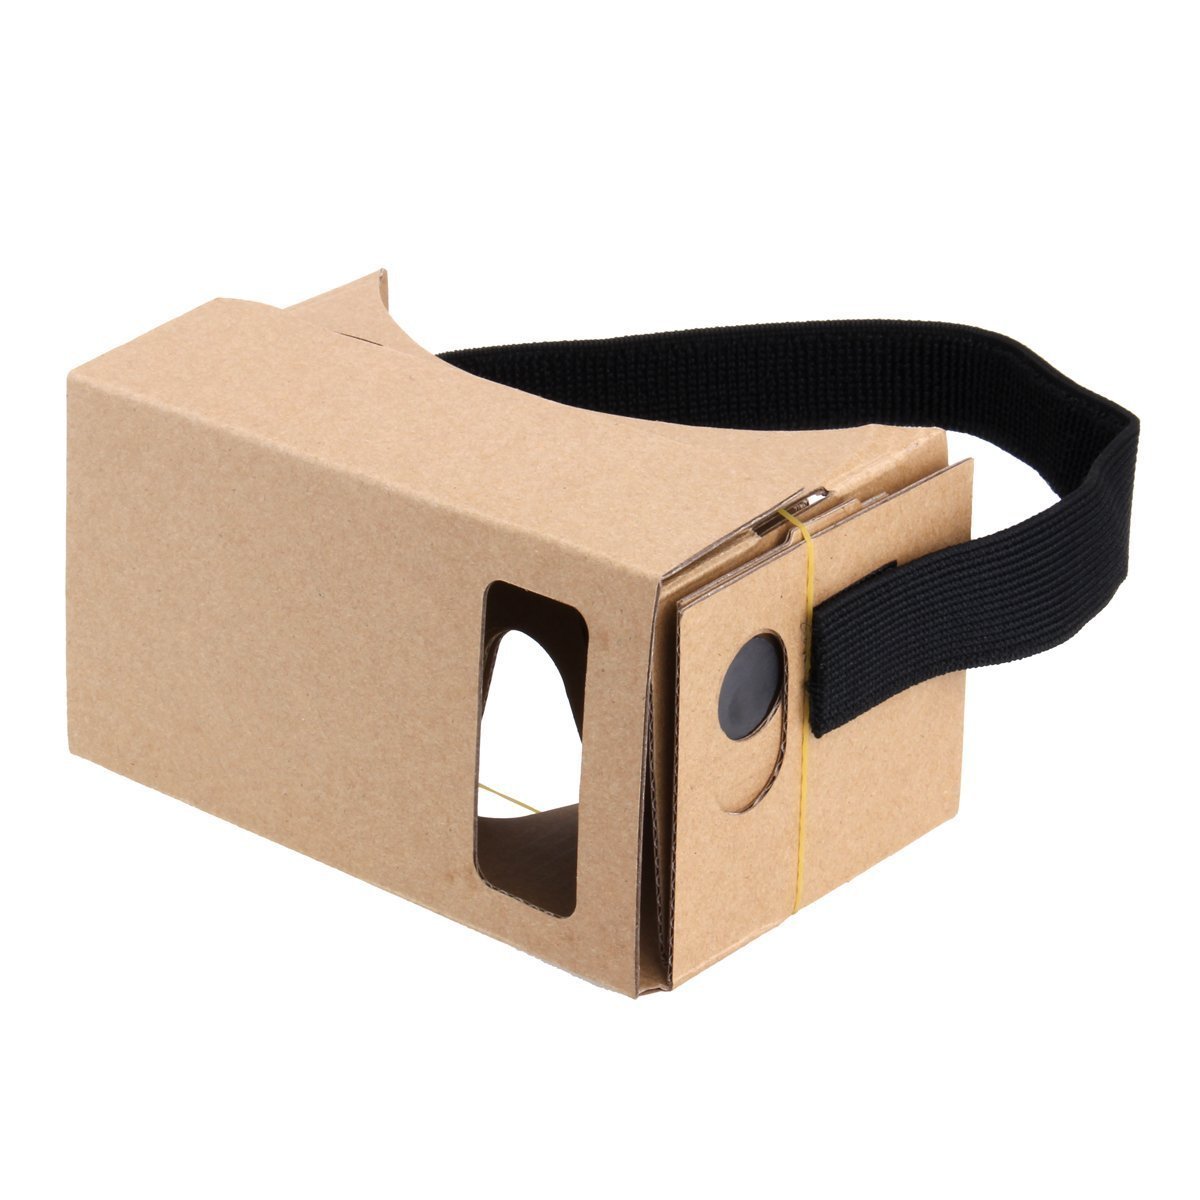 Google Cardboard Virtual Reality Headset 3D VR Glasses with NFC 5.4 inch Screen